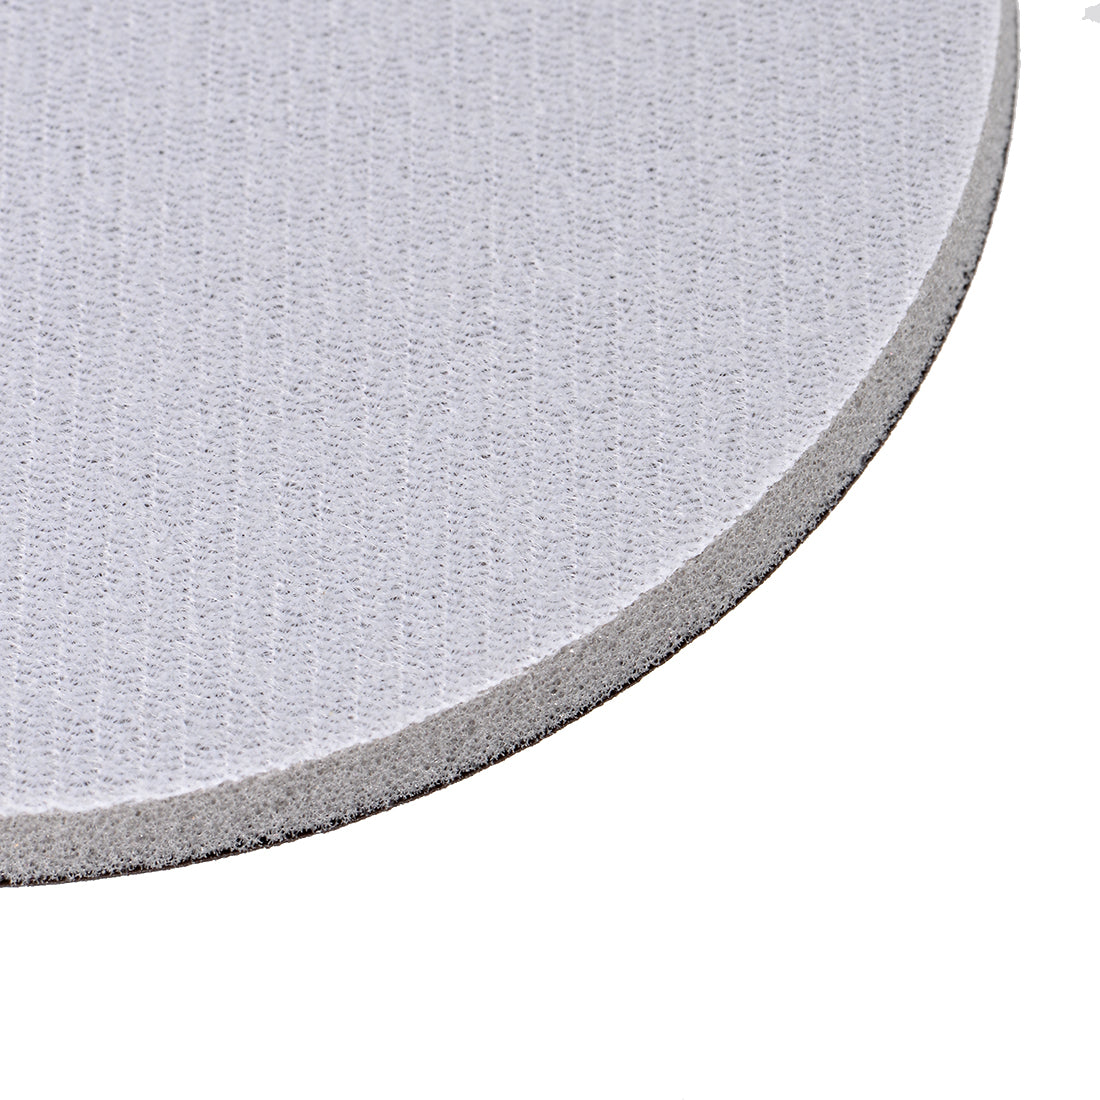 uxcell Uxcell 4-Inch 600-Grits Hook and Loop Sanding Disc, Sponge Sanding Pad Wet Dry Aluminum Oxide Sandpaper for Polishing & Grinding 5pcs